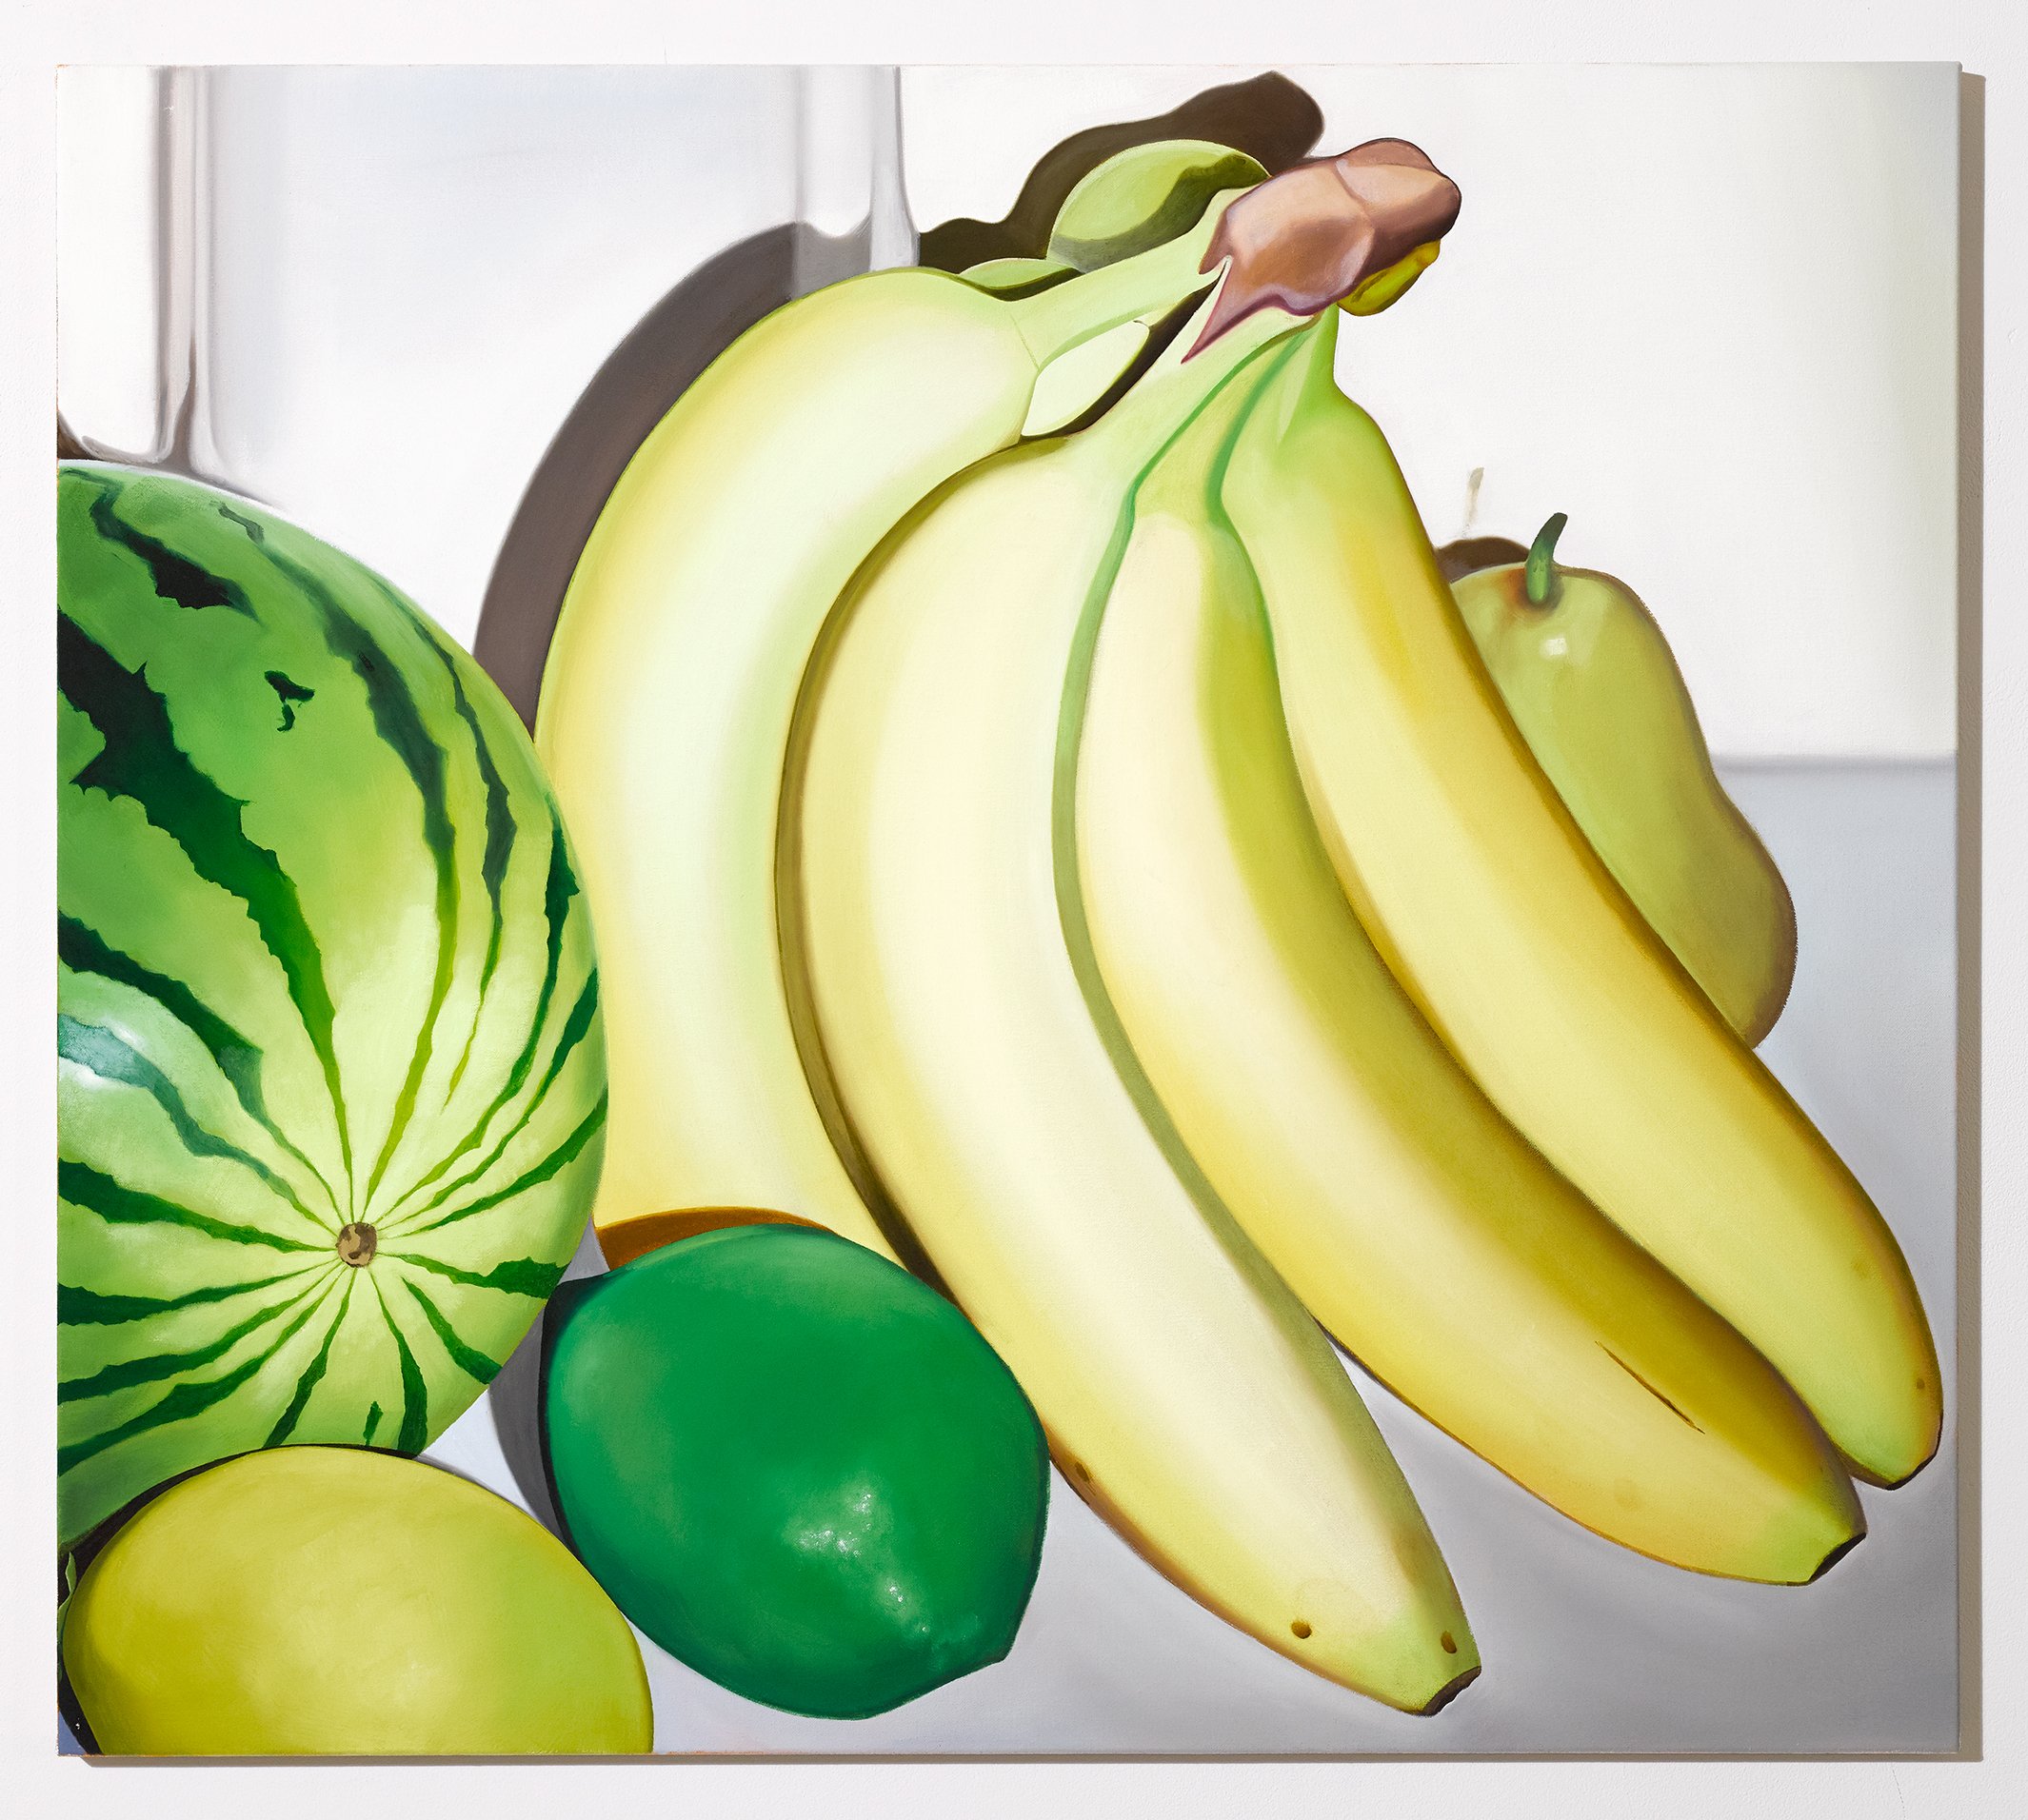  Proximate bananas I (2021)  Oil on linen  80 x 90cm  Available 